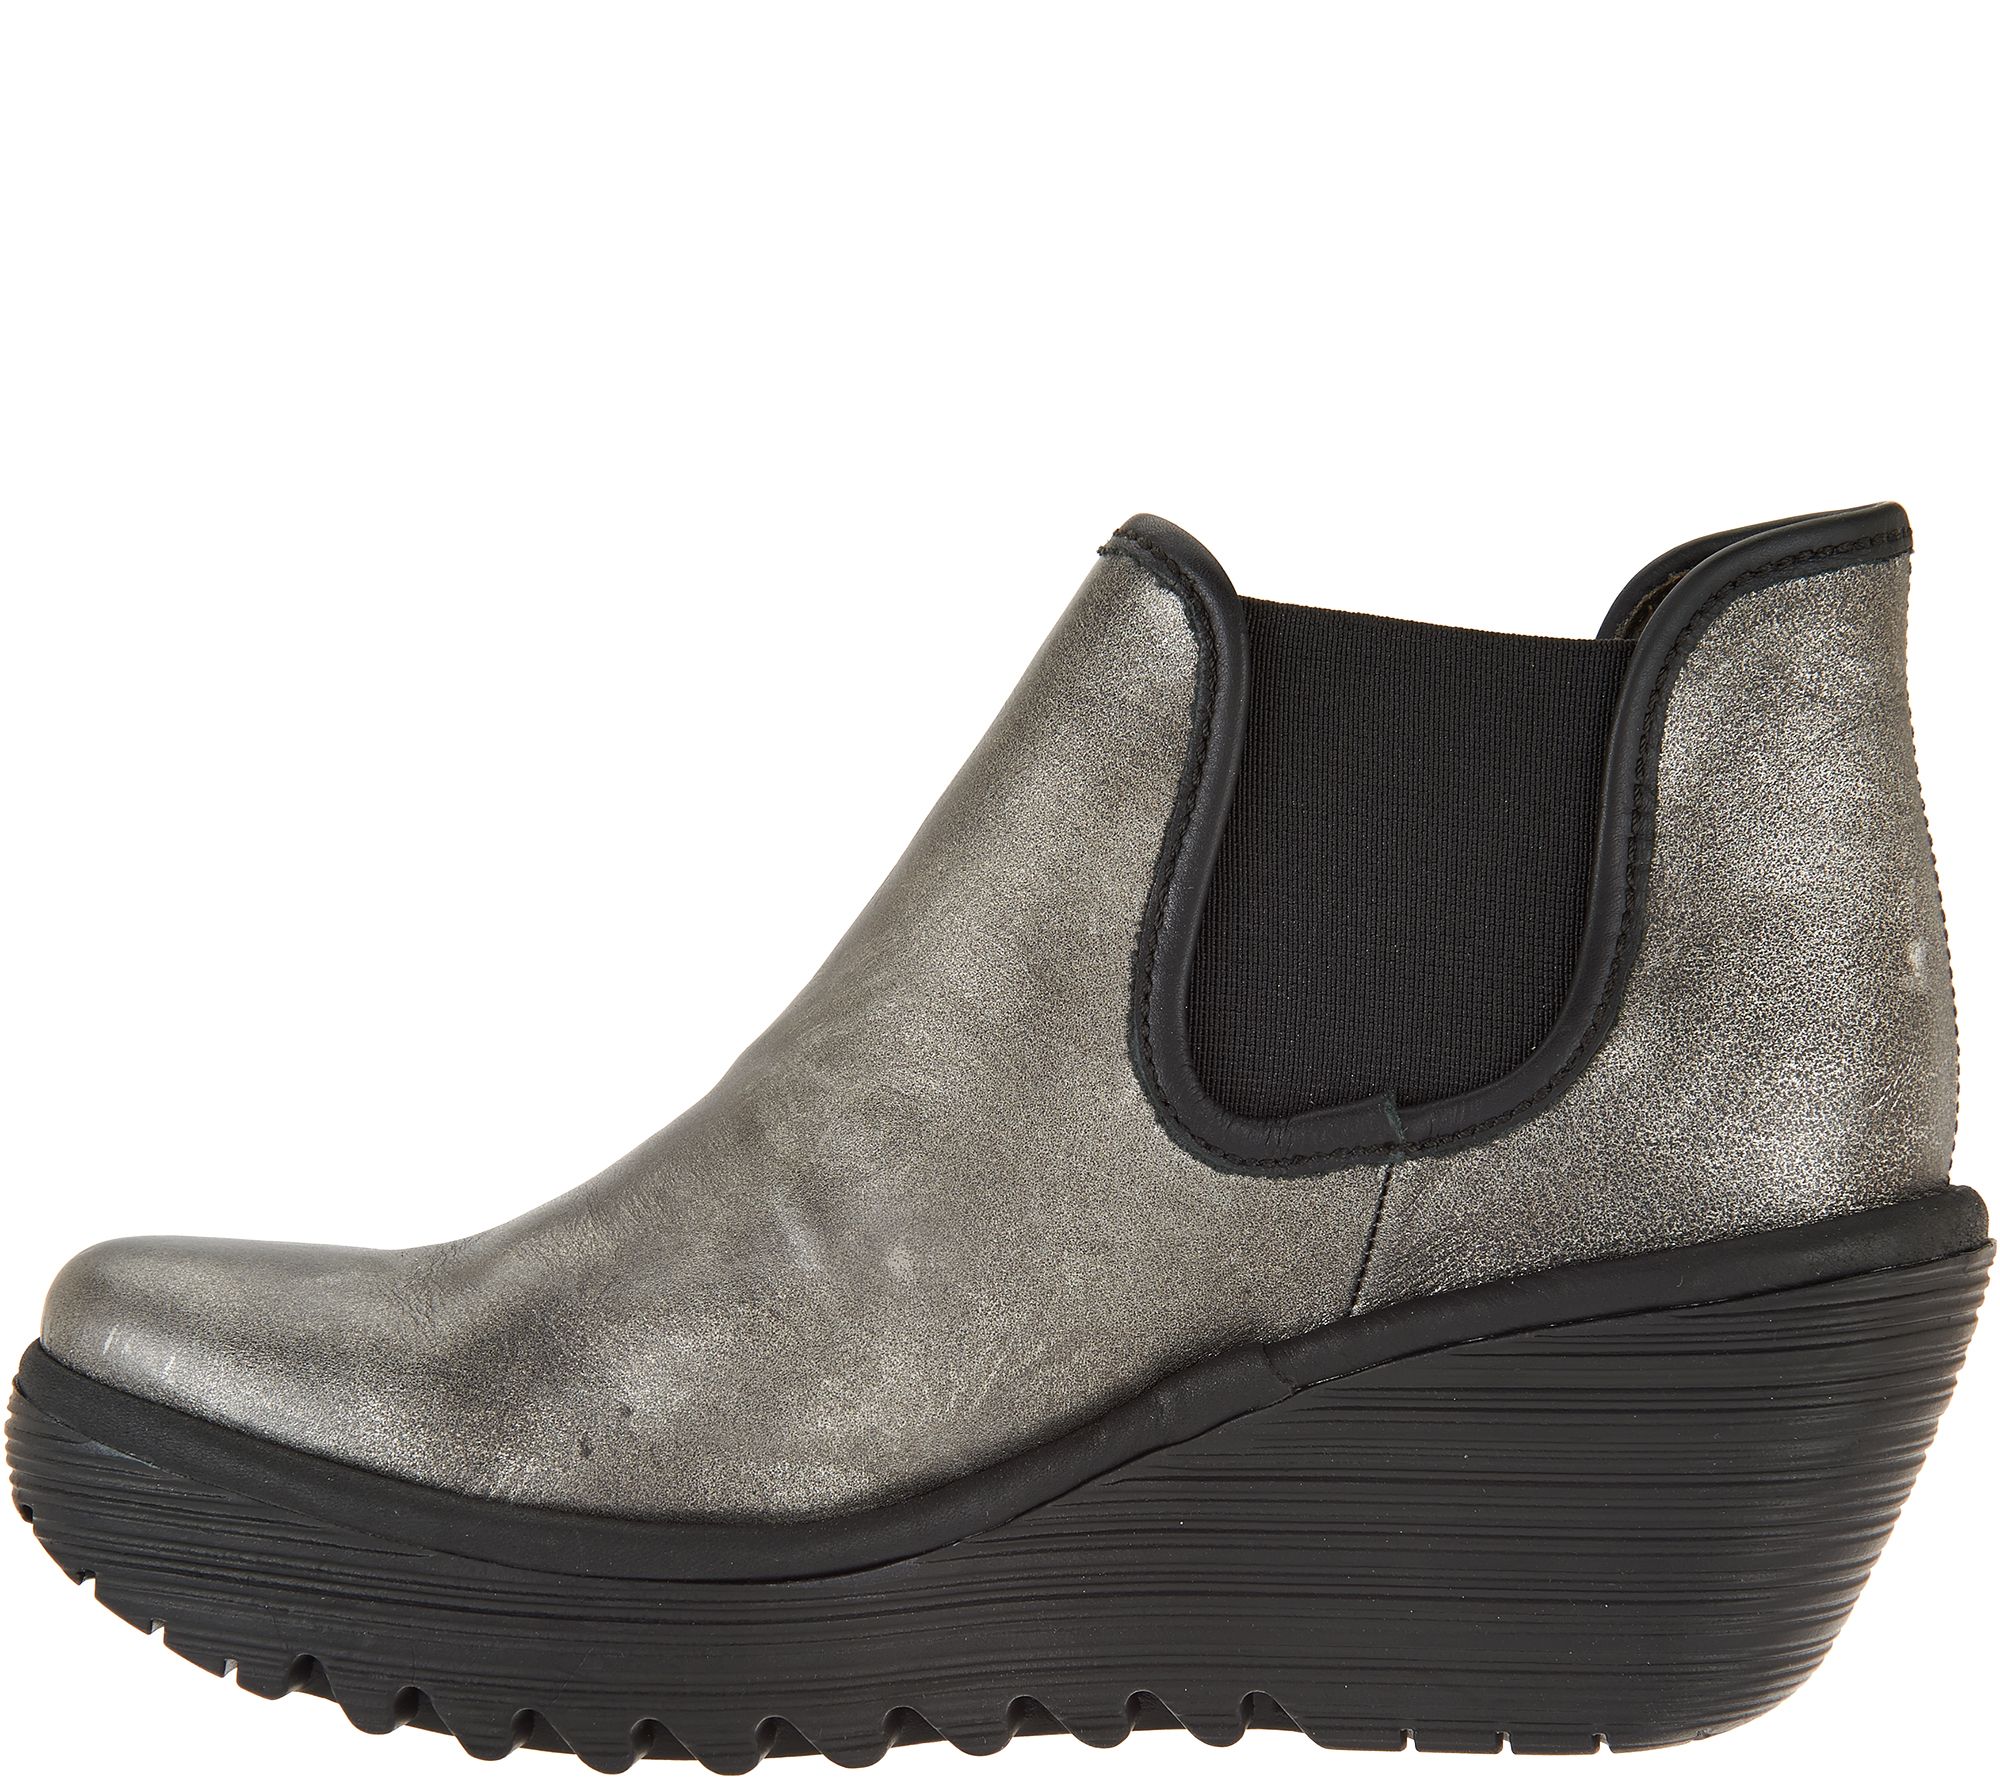 FLY London Leather Slip-on Wedge Boots - Yat - QVC.com